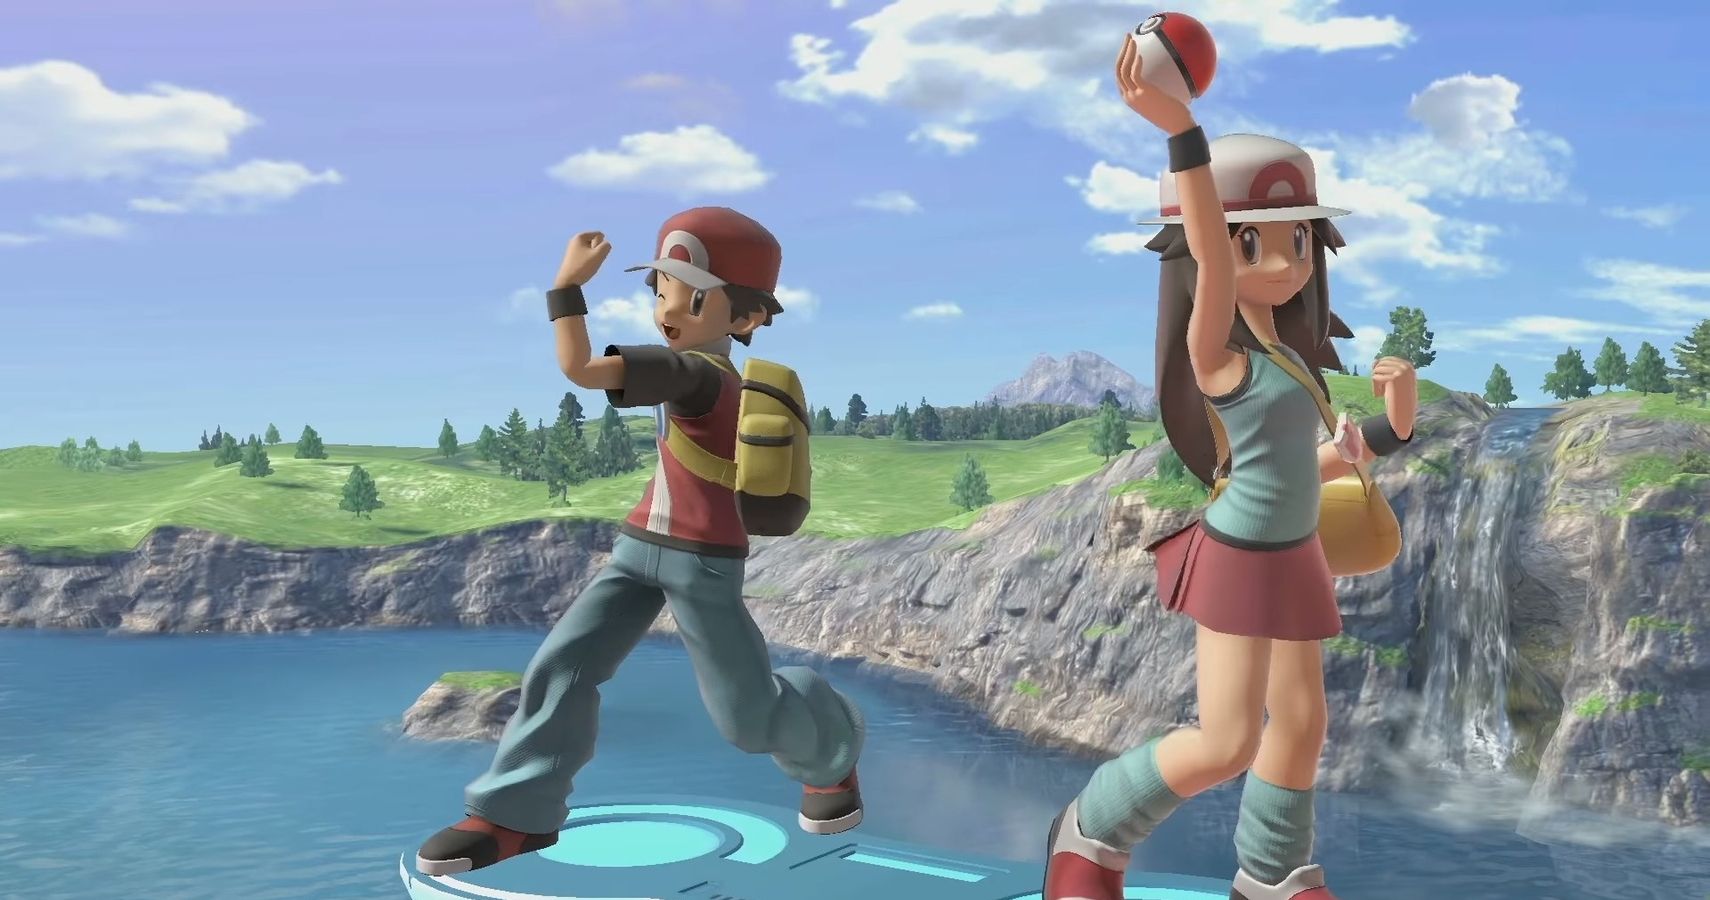 Why A Pokemon Will Be The Next Super Smash Bros. Ultimate DLC Fighter Nintendo Direct